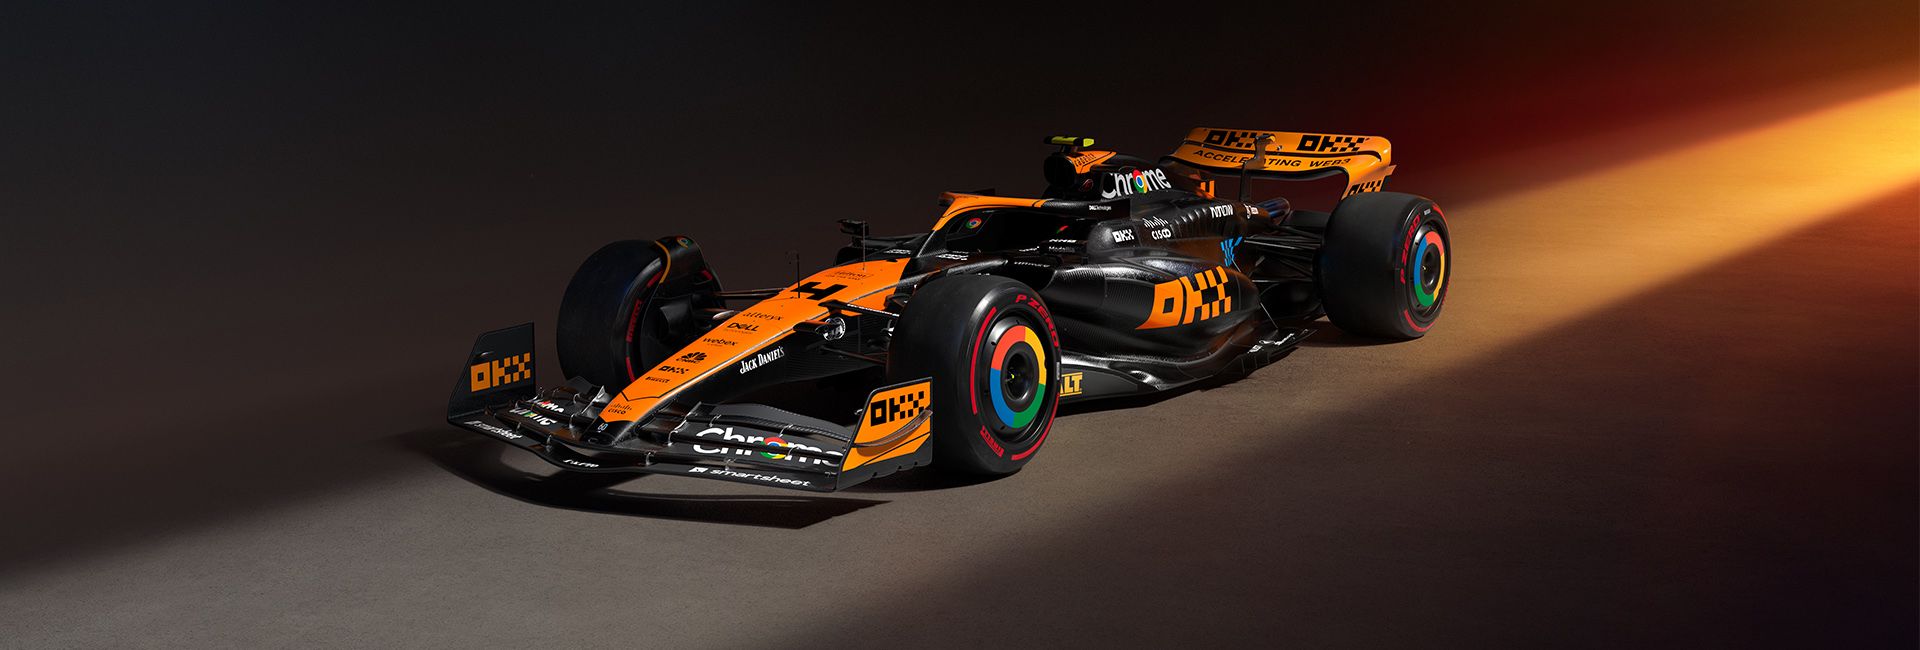 McLaren reveals 'stealth mode' livery for Singapore and Japan